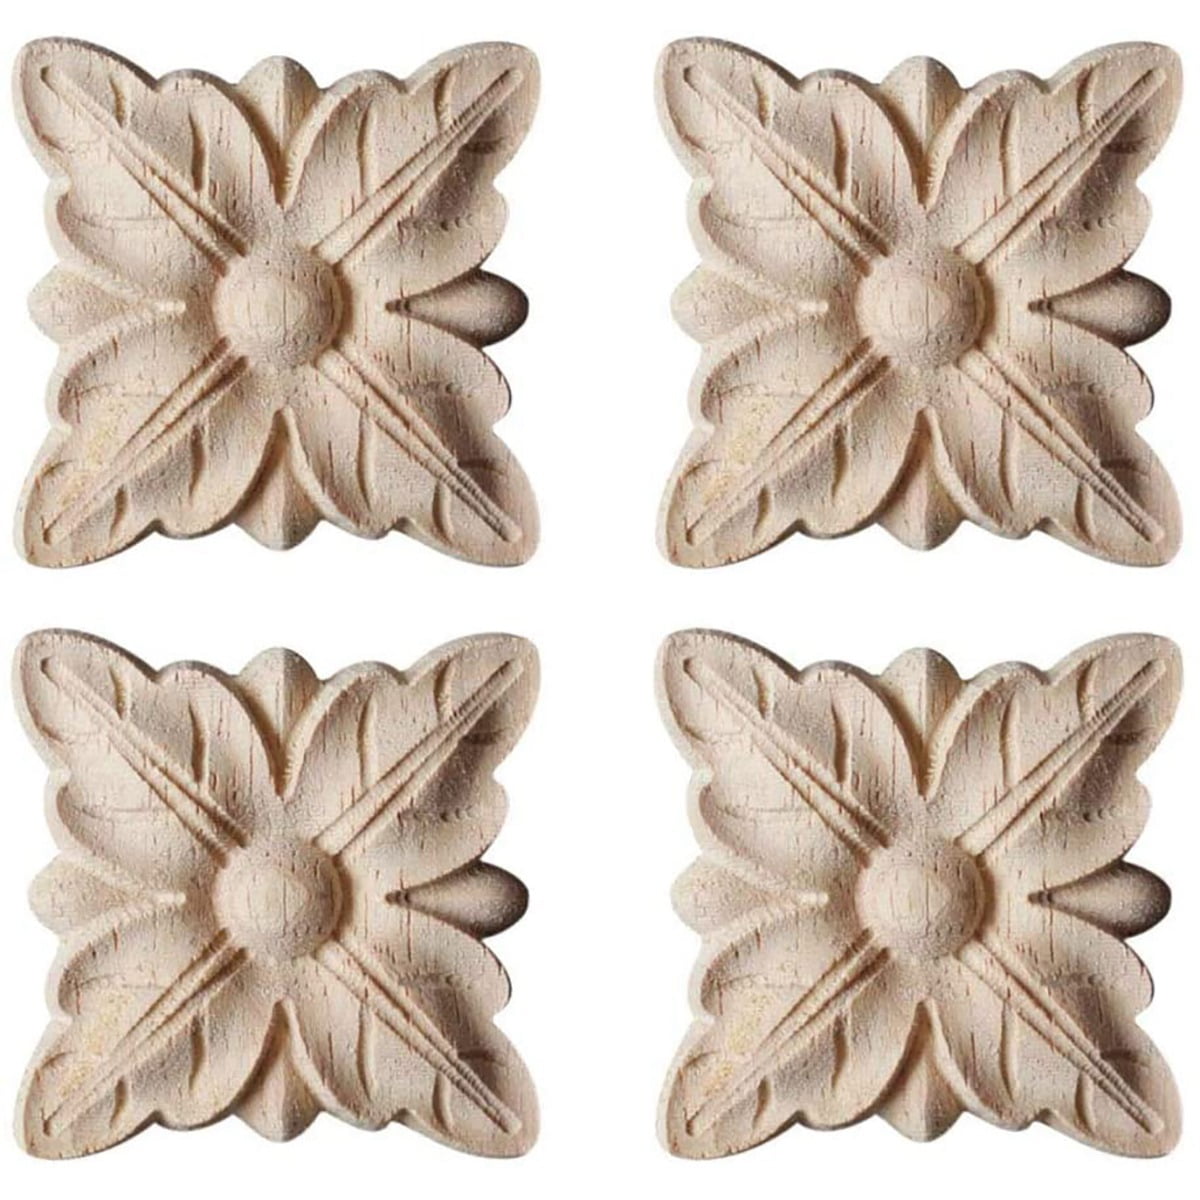 Square Wood Carving Decal Woodcarving Wall Door Onlay Applique Unpainted Decal 